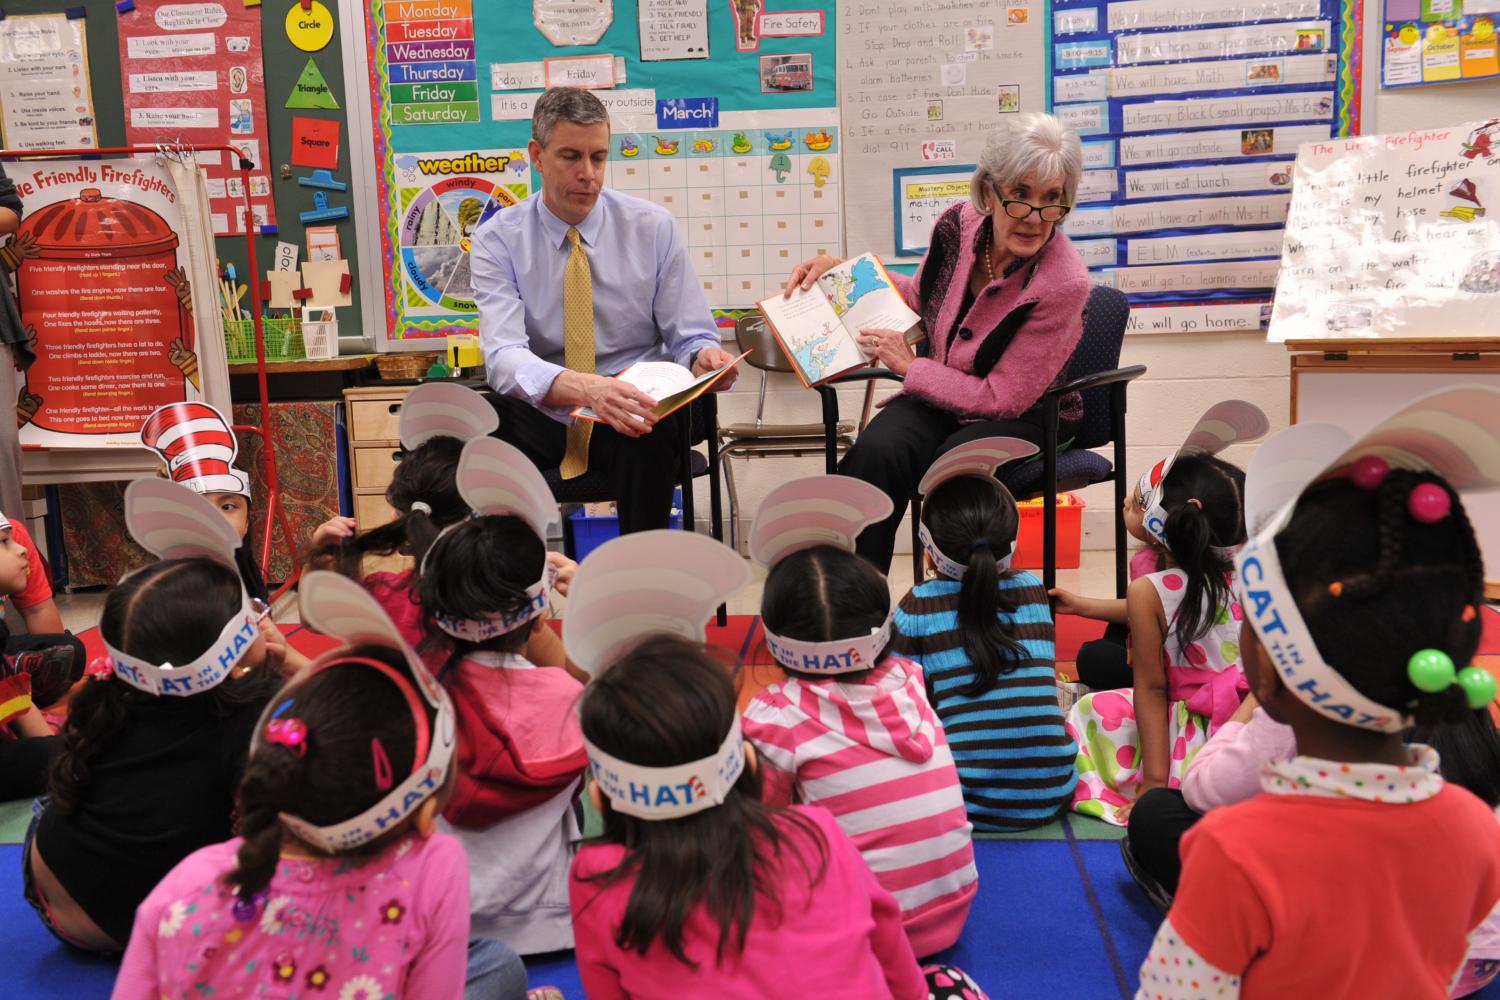 Former+U.S.+Dept.+of+Education+Secretary+Arne+Duncan+reads+a+book+to+Rolling+Terrace+Elementary+School+students+in+Montgomery+County.+